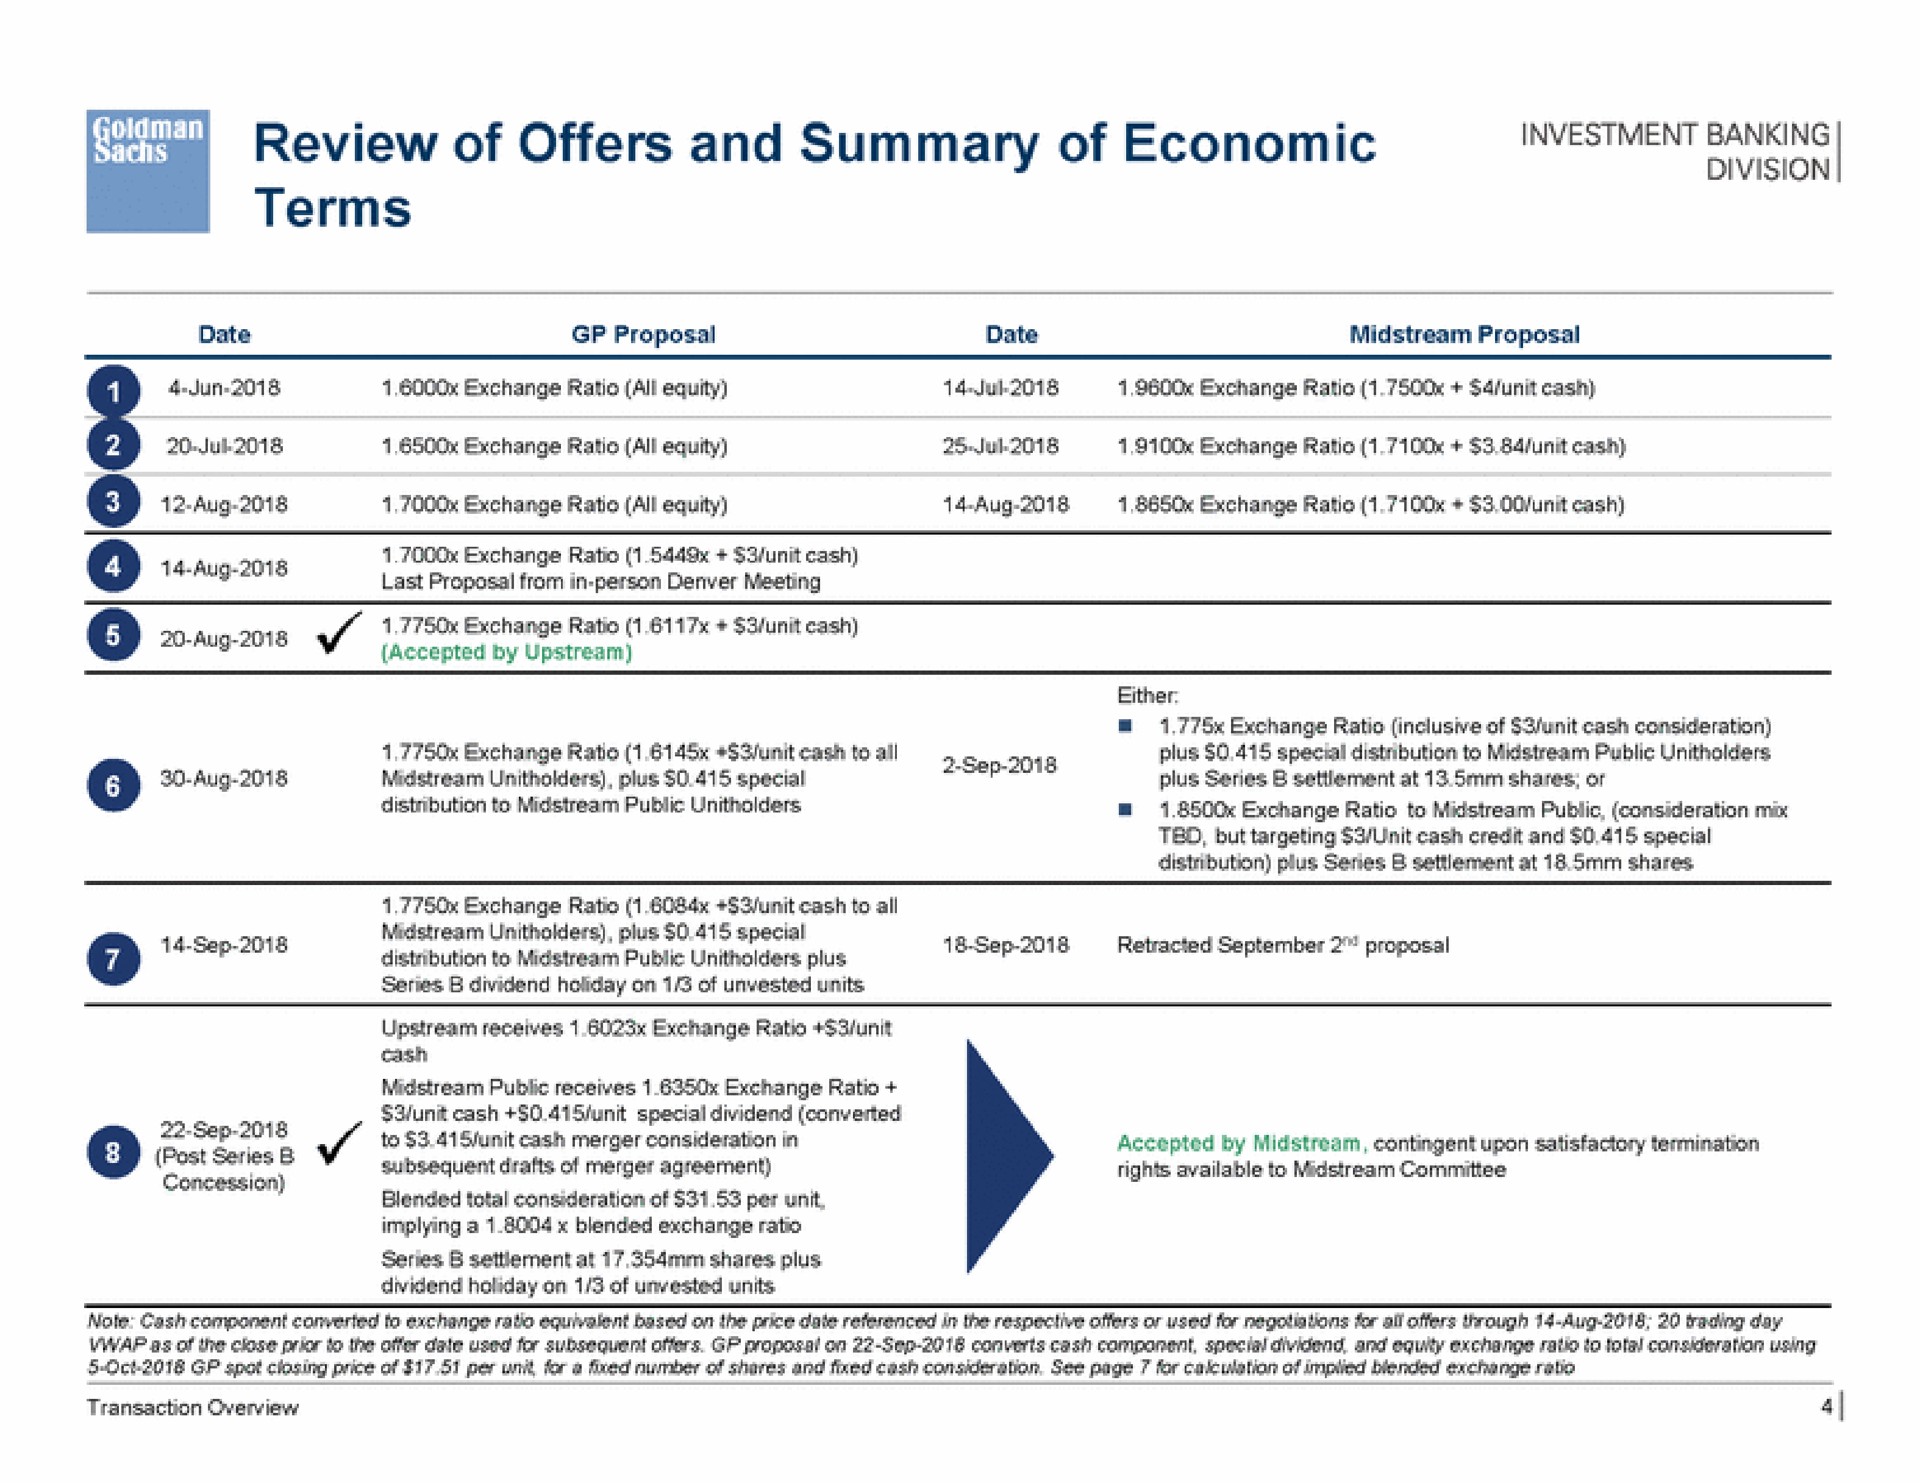 review of offers and summary of economic terms a | Goldman Sachs